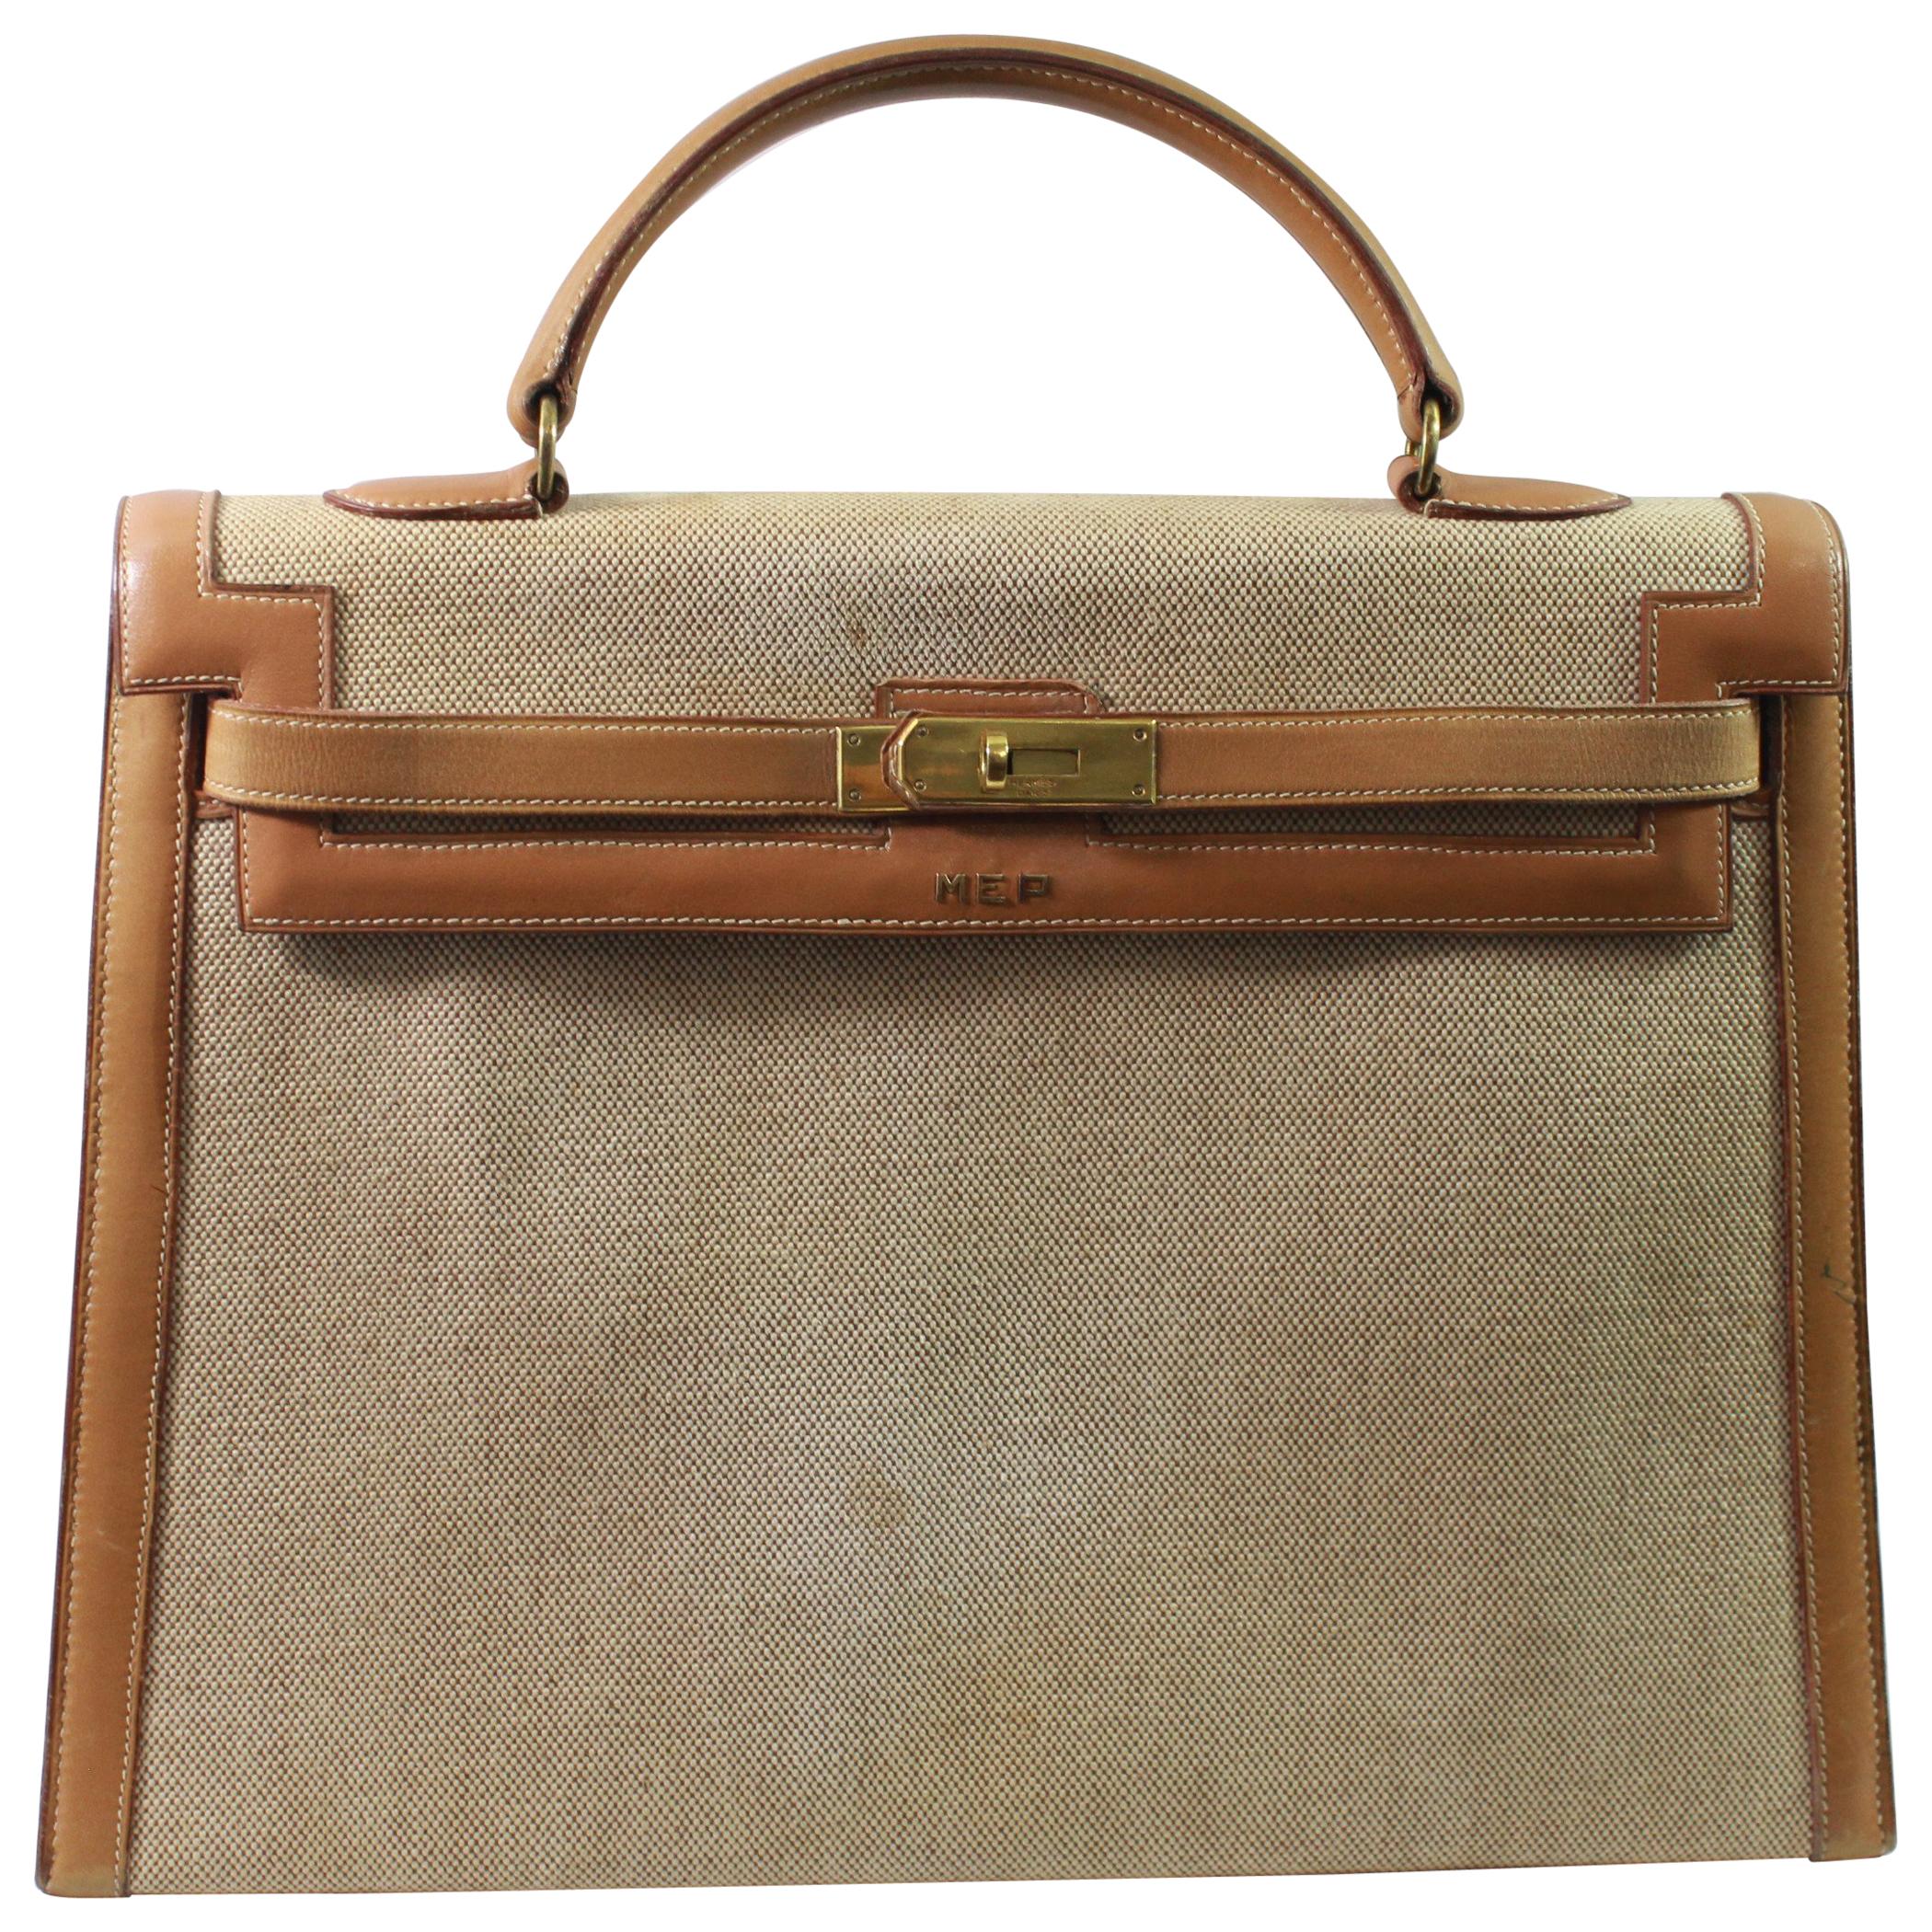 Viintage Hermes Kelly 35 in Brown Leather and Canvas. Fair condition